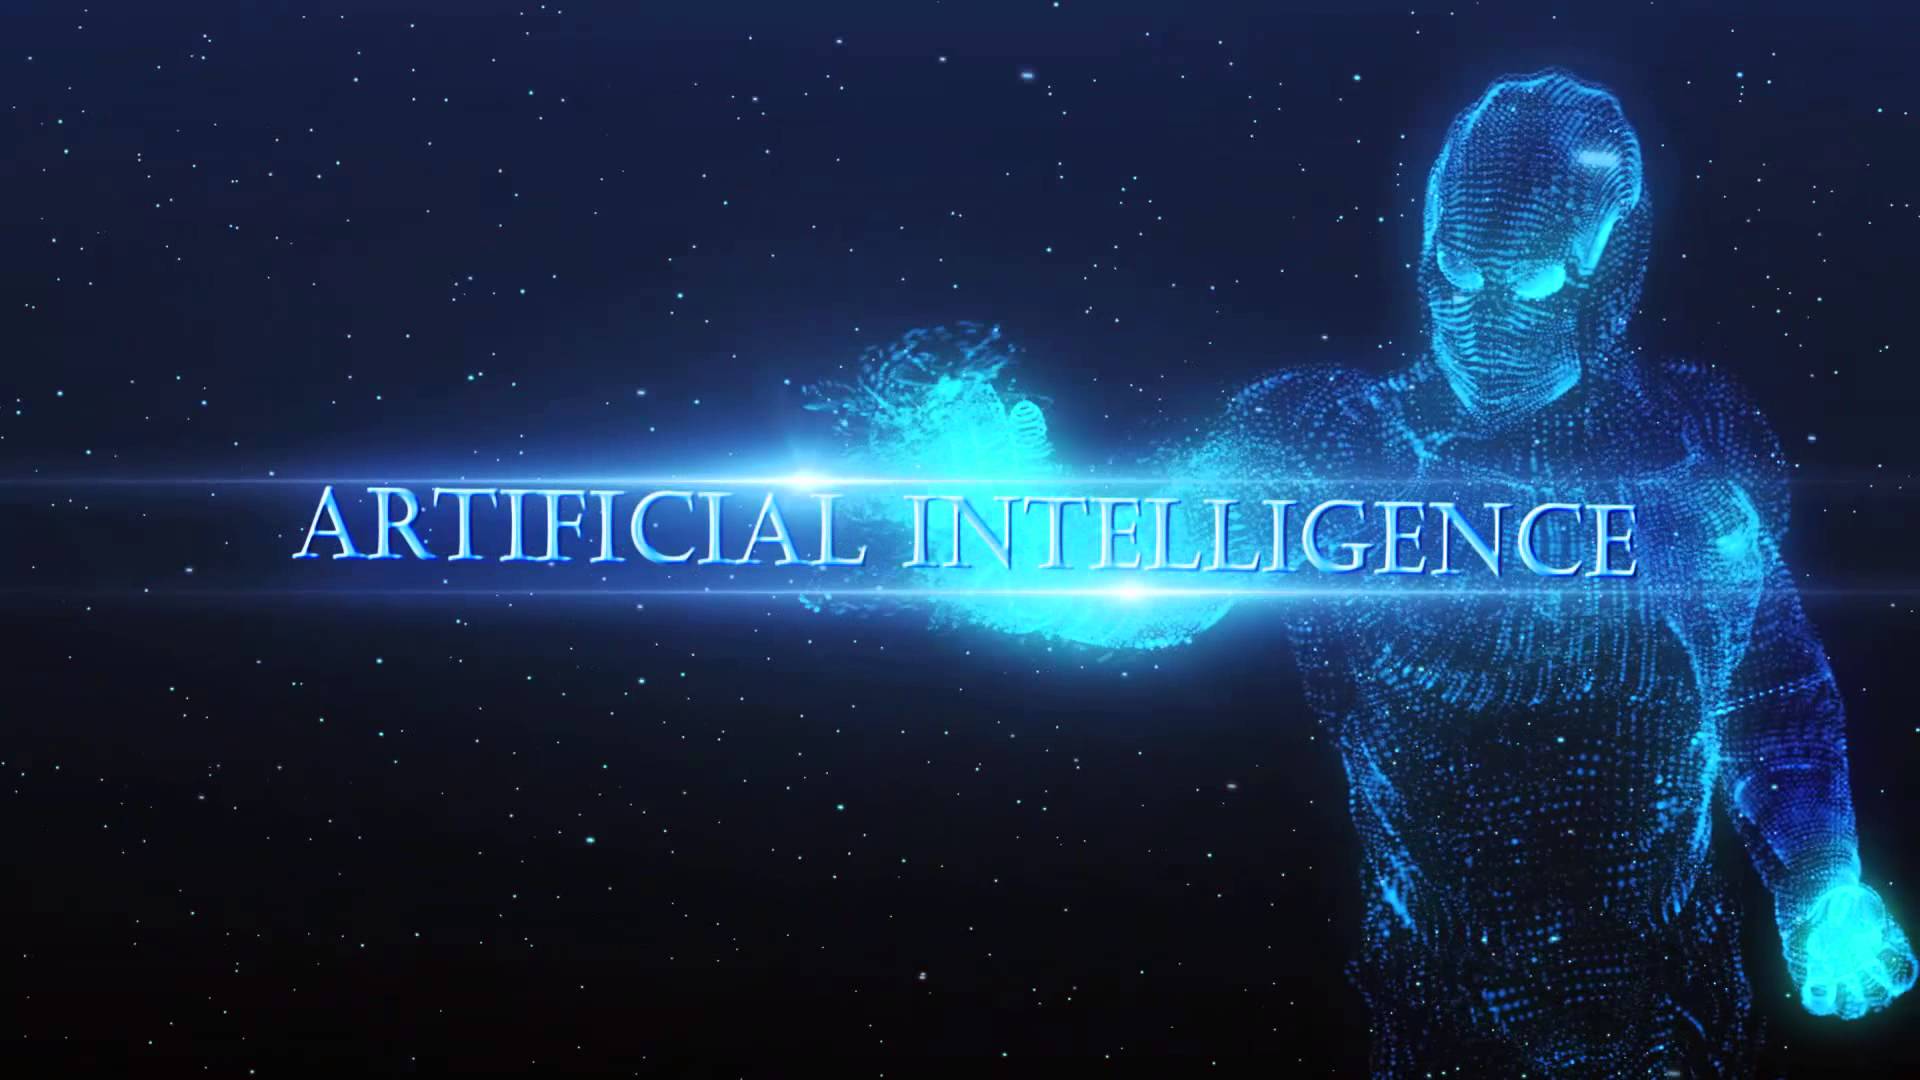 Artificial Intelligence Wallpapers image information